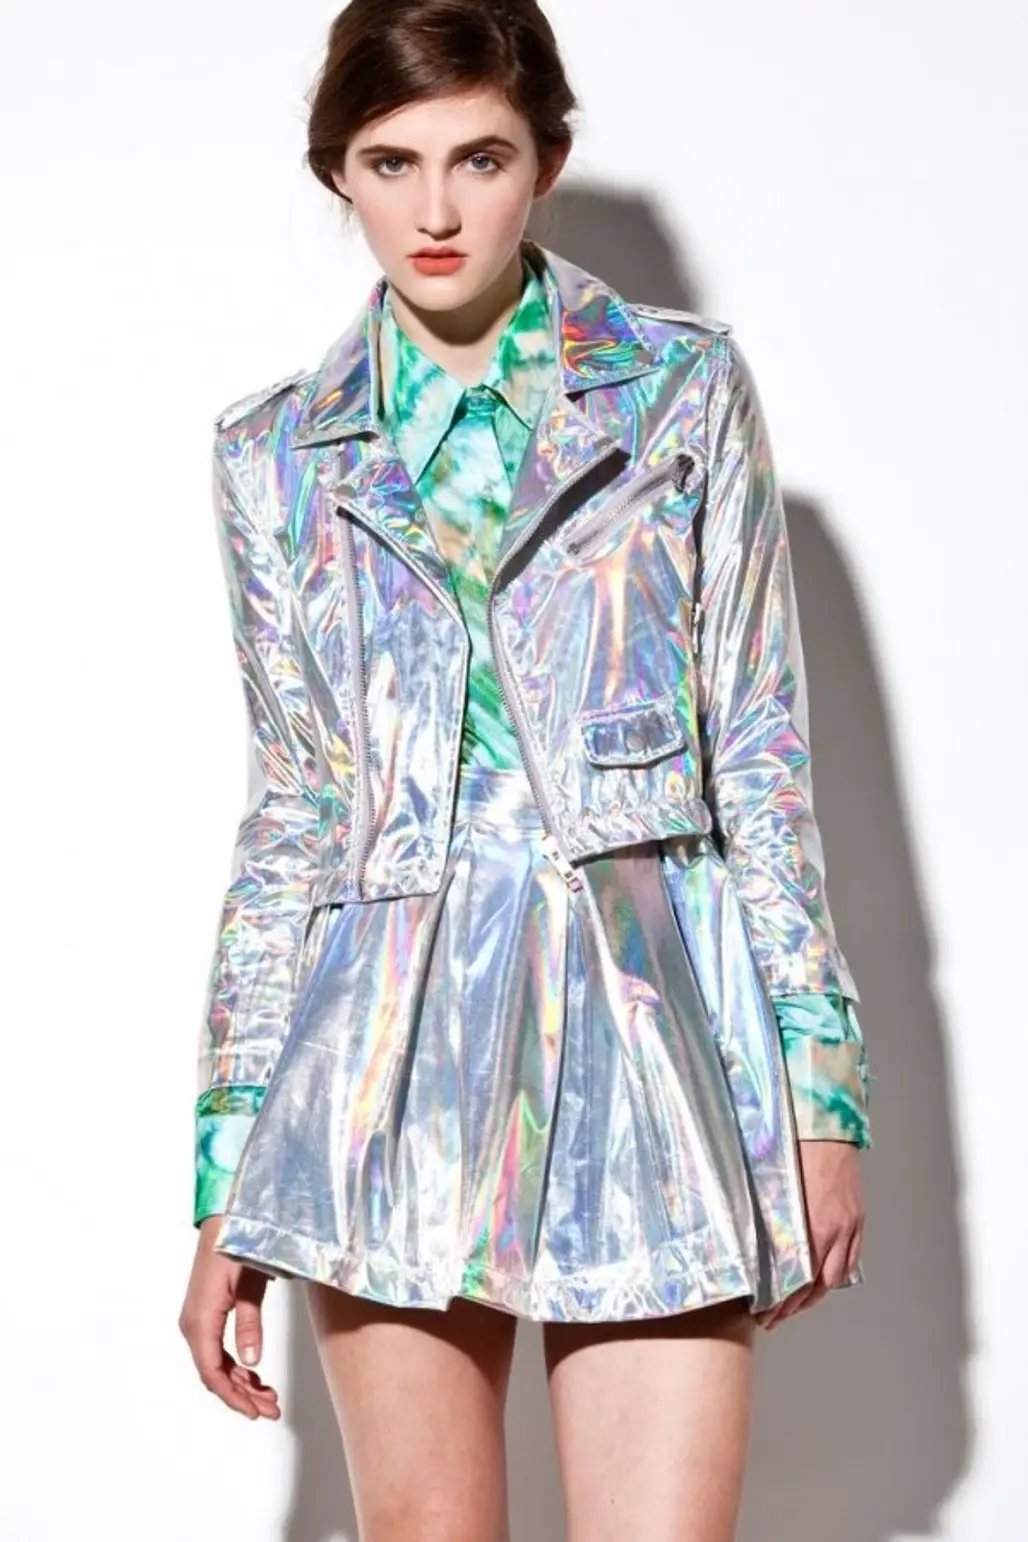 Thrifted and Modern – Hologram Jacket